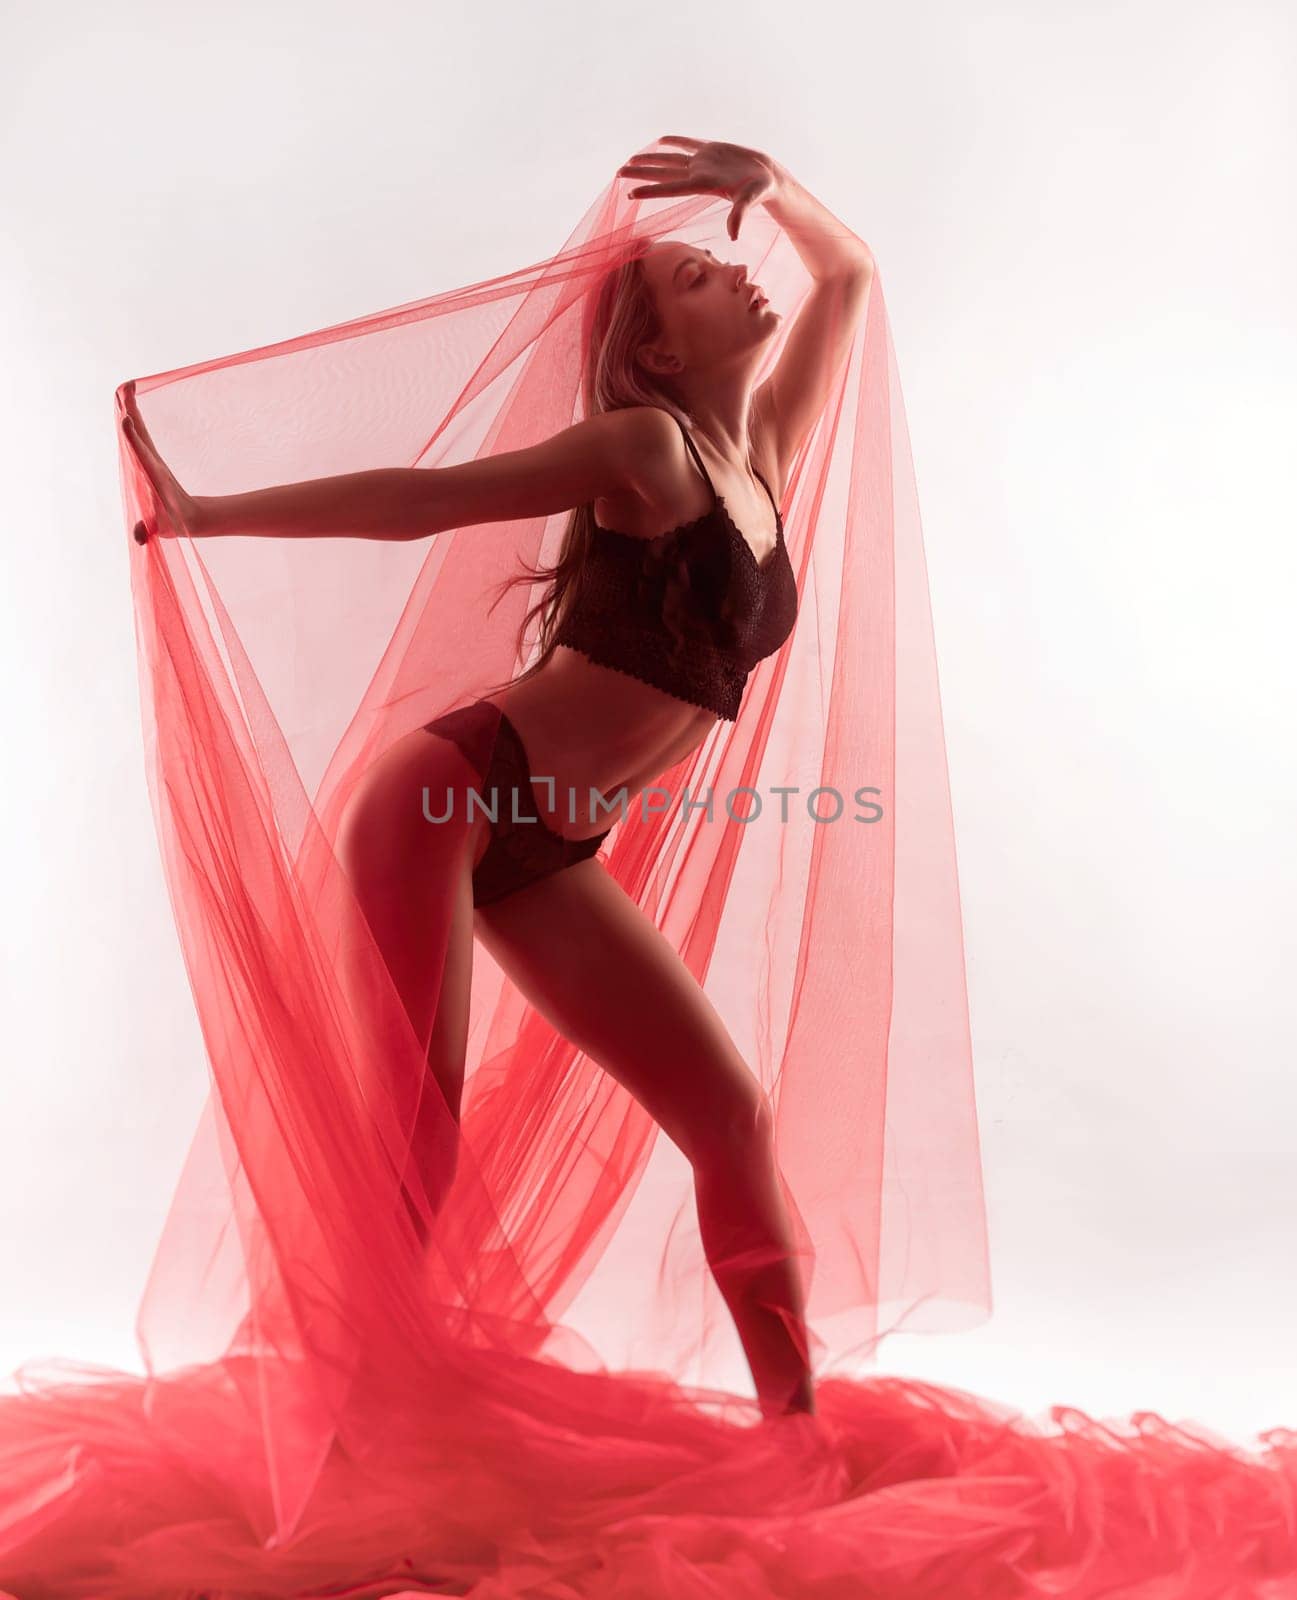 sexy girl in underwear under a transparent red fabric poses erotically and sensually on white background